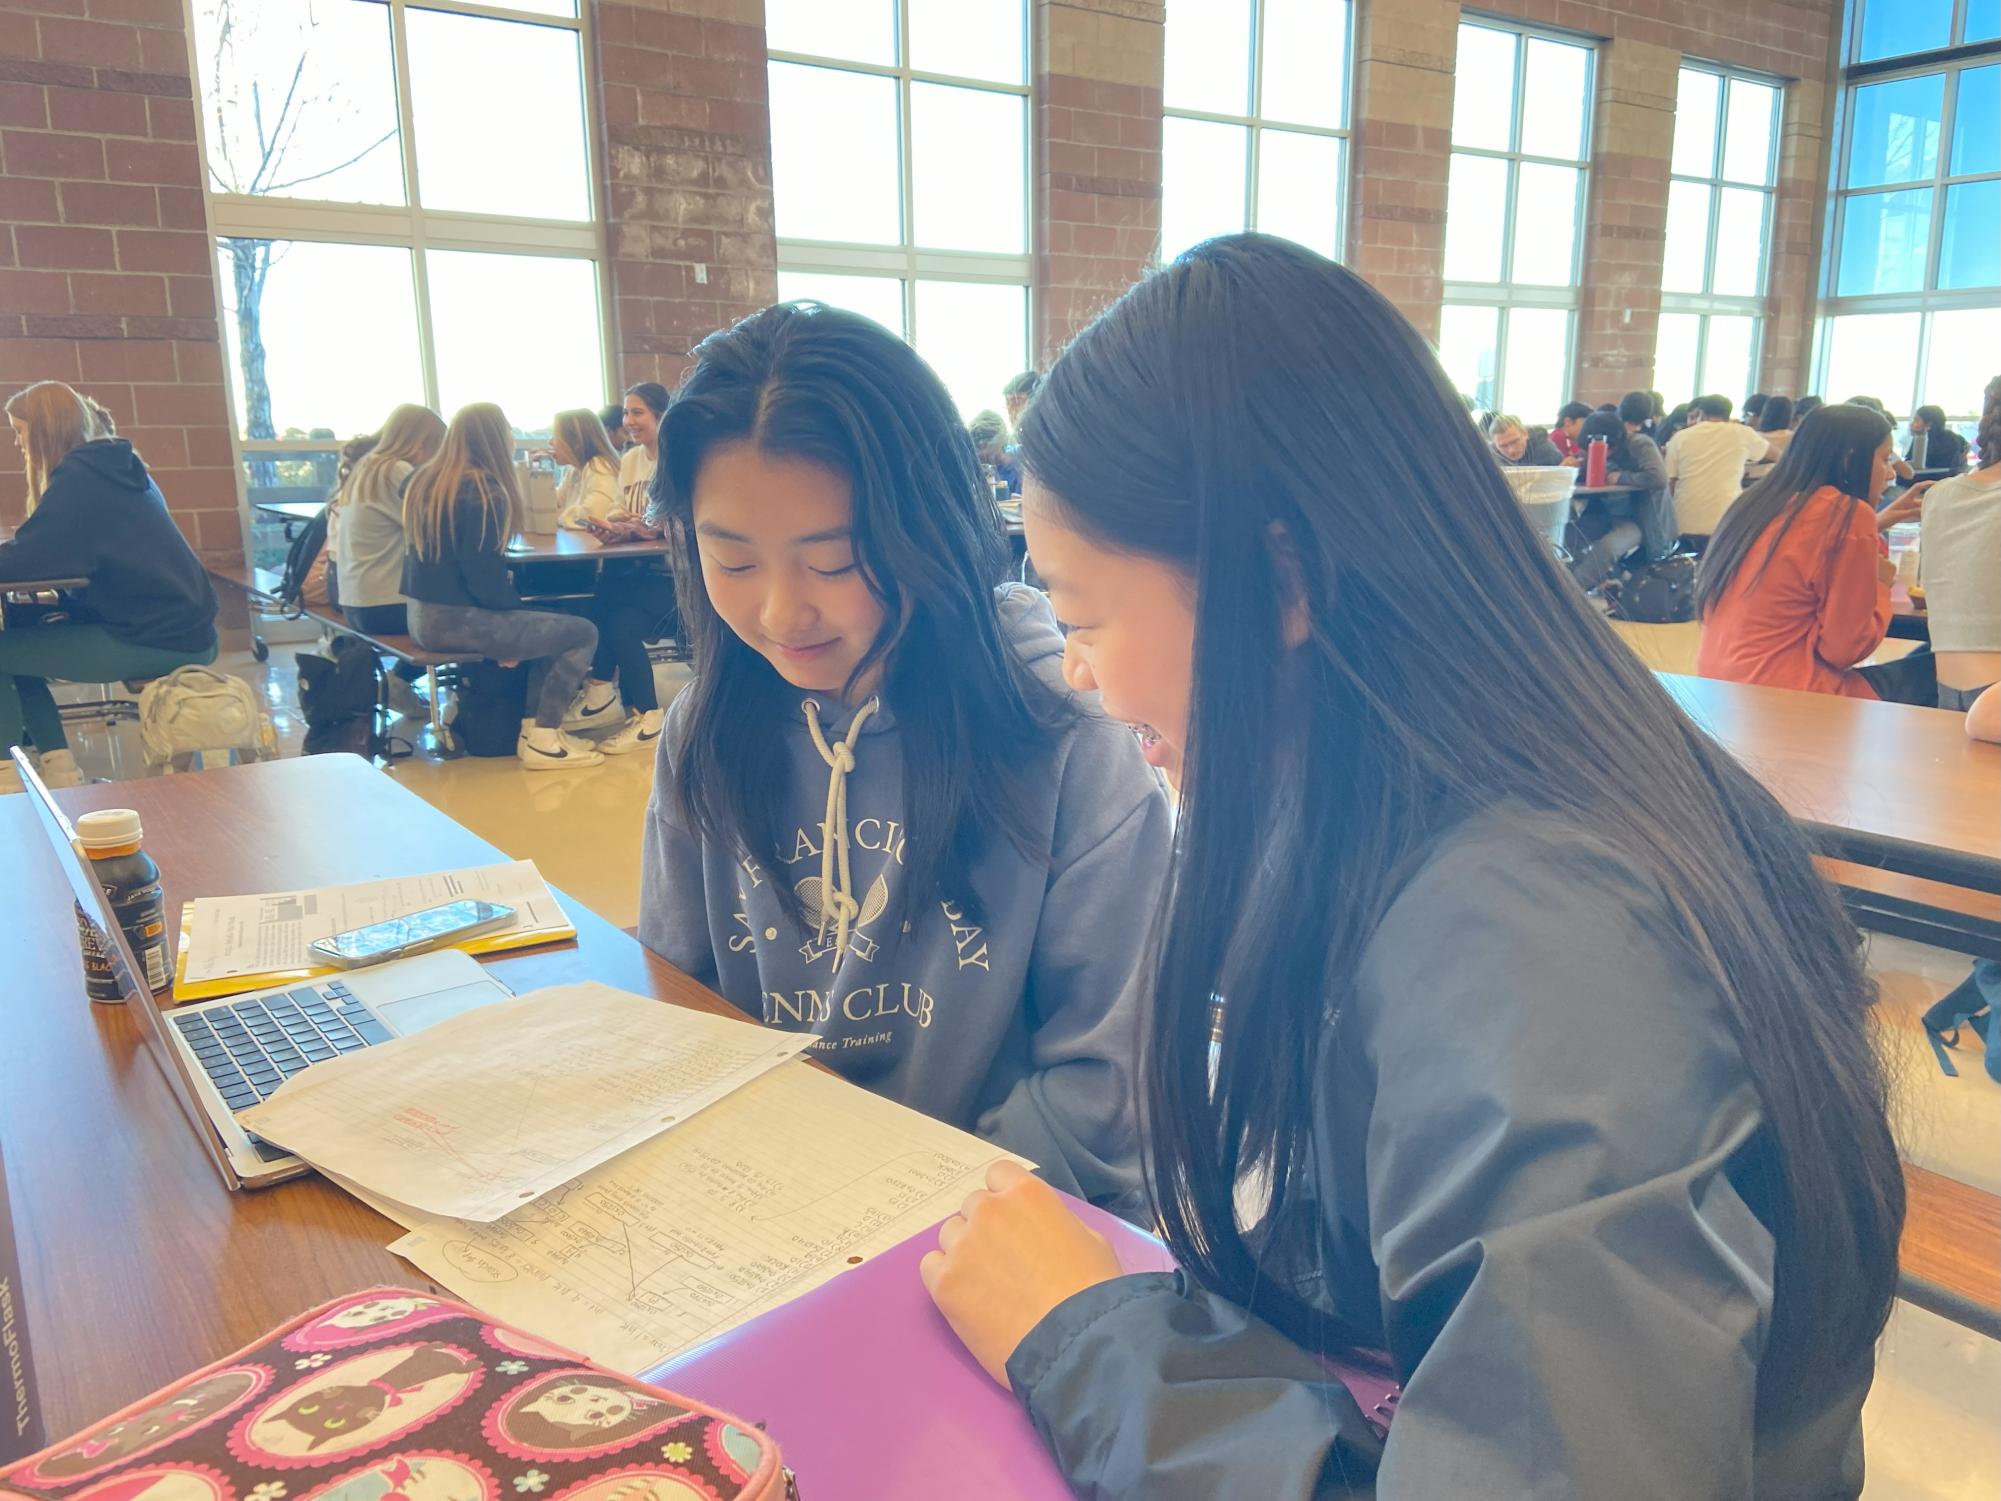 Hannah Zhang ‘26 and Olivia Fang ‘26 study together during lunch in the cafeteria Nov. 10. Zhang reviewed material from her AP Computer Science class before an upcoming quiz.  “I like studying in the cafeteria because I’m able to work while talking with friends,” Zhang said. “If I need help with something I can ask them and when I dont have homework I can talk with them.